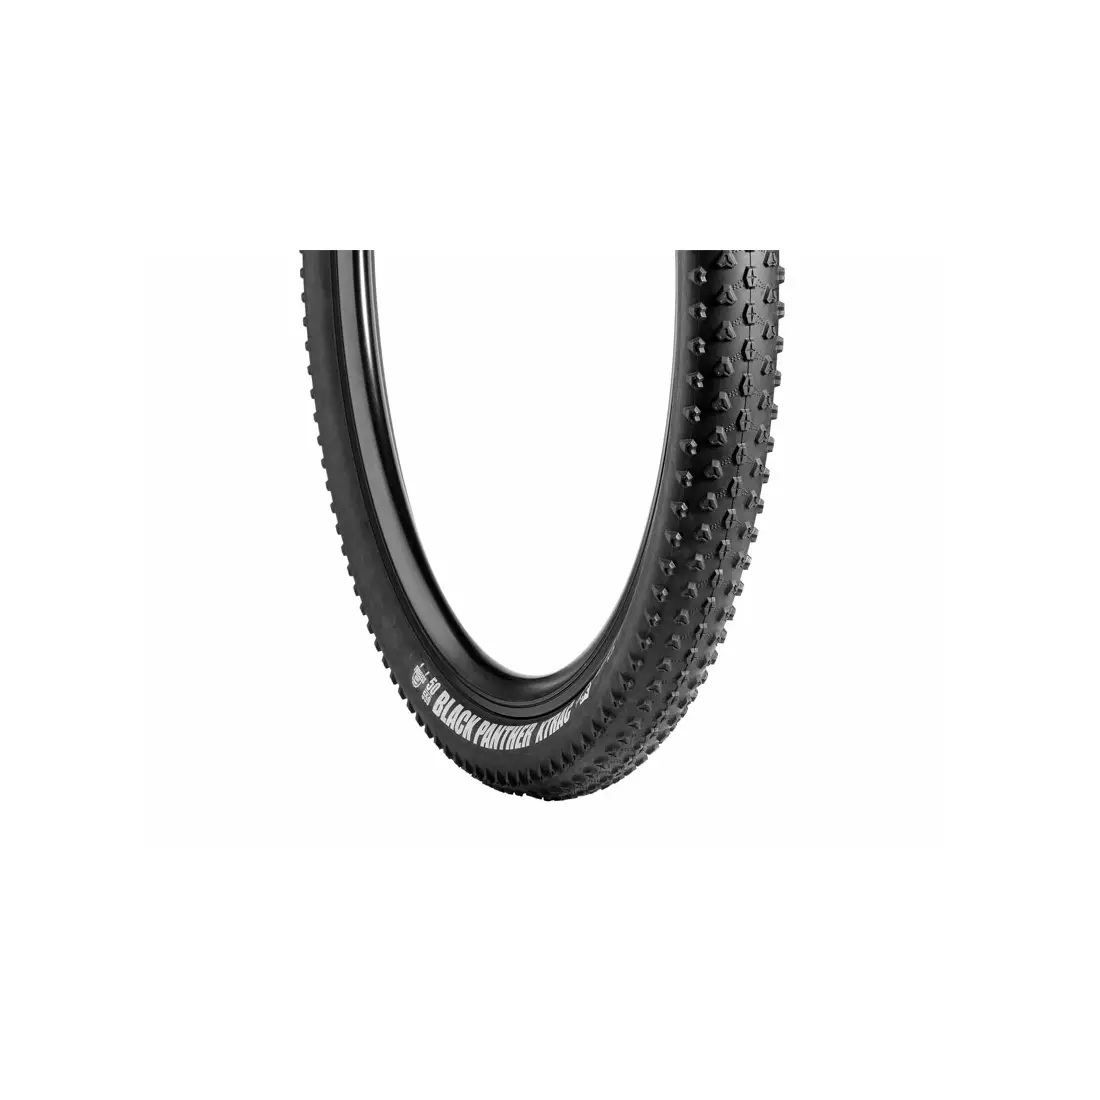 VREDESTEIN BLACK PANTHER XTREME HEAVY DUTY mtb bicycle tyre 27,5x2.20 (55-584) TUBELESS READY TPI120 745g black coiled VRD-27336